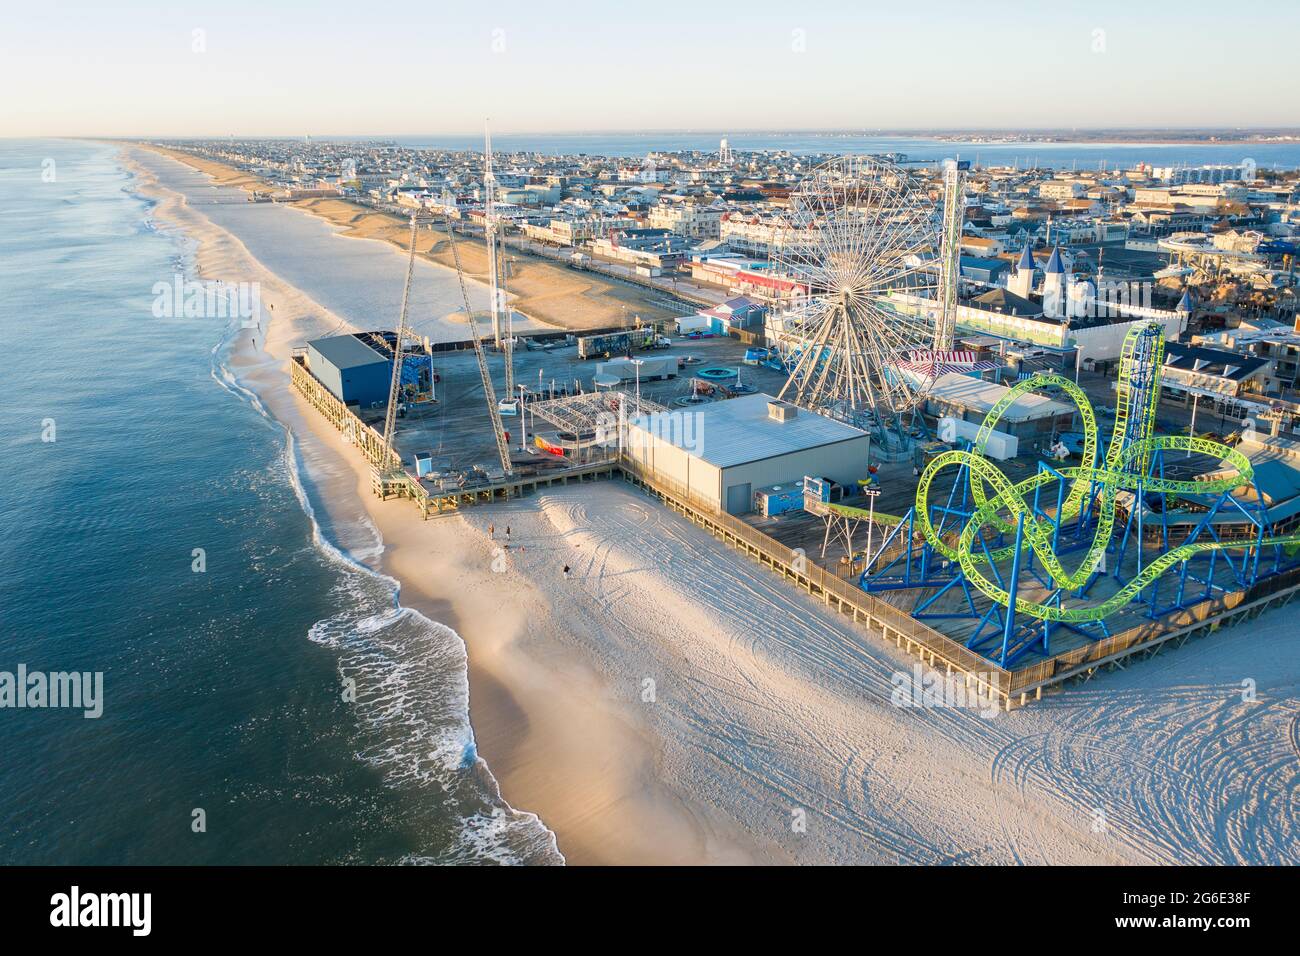 Aerial of New Jersey shoreline with amusement rides along the boardwalk and sand. Stock Photo